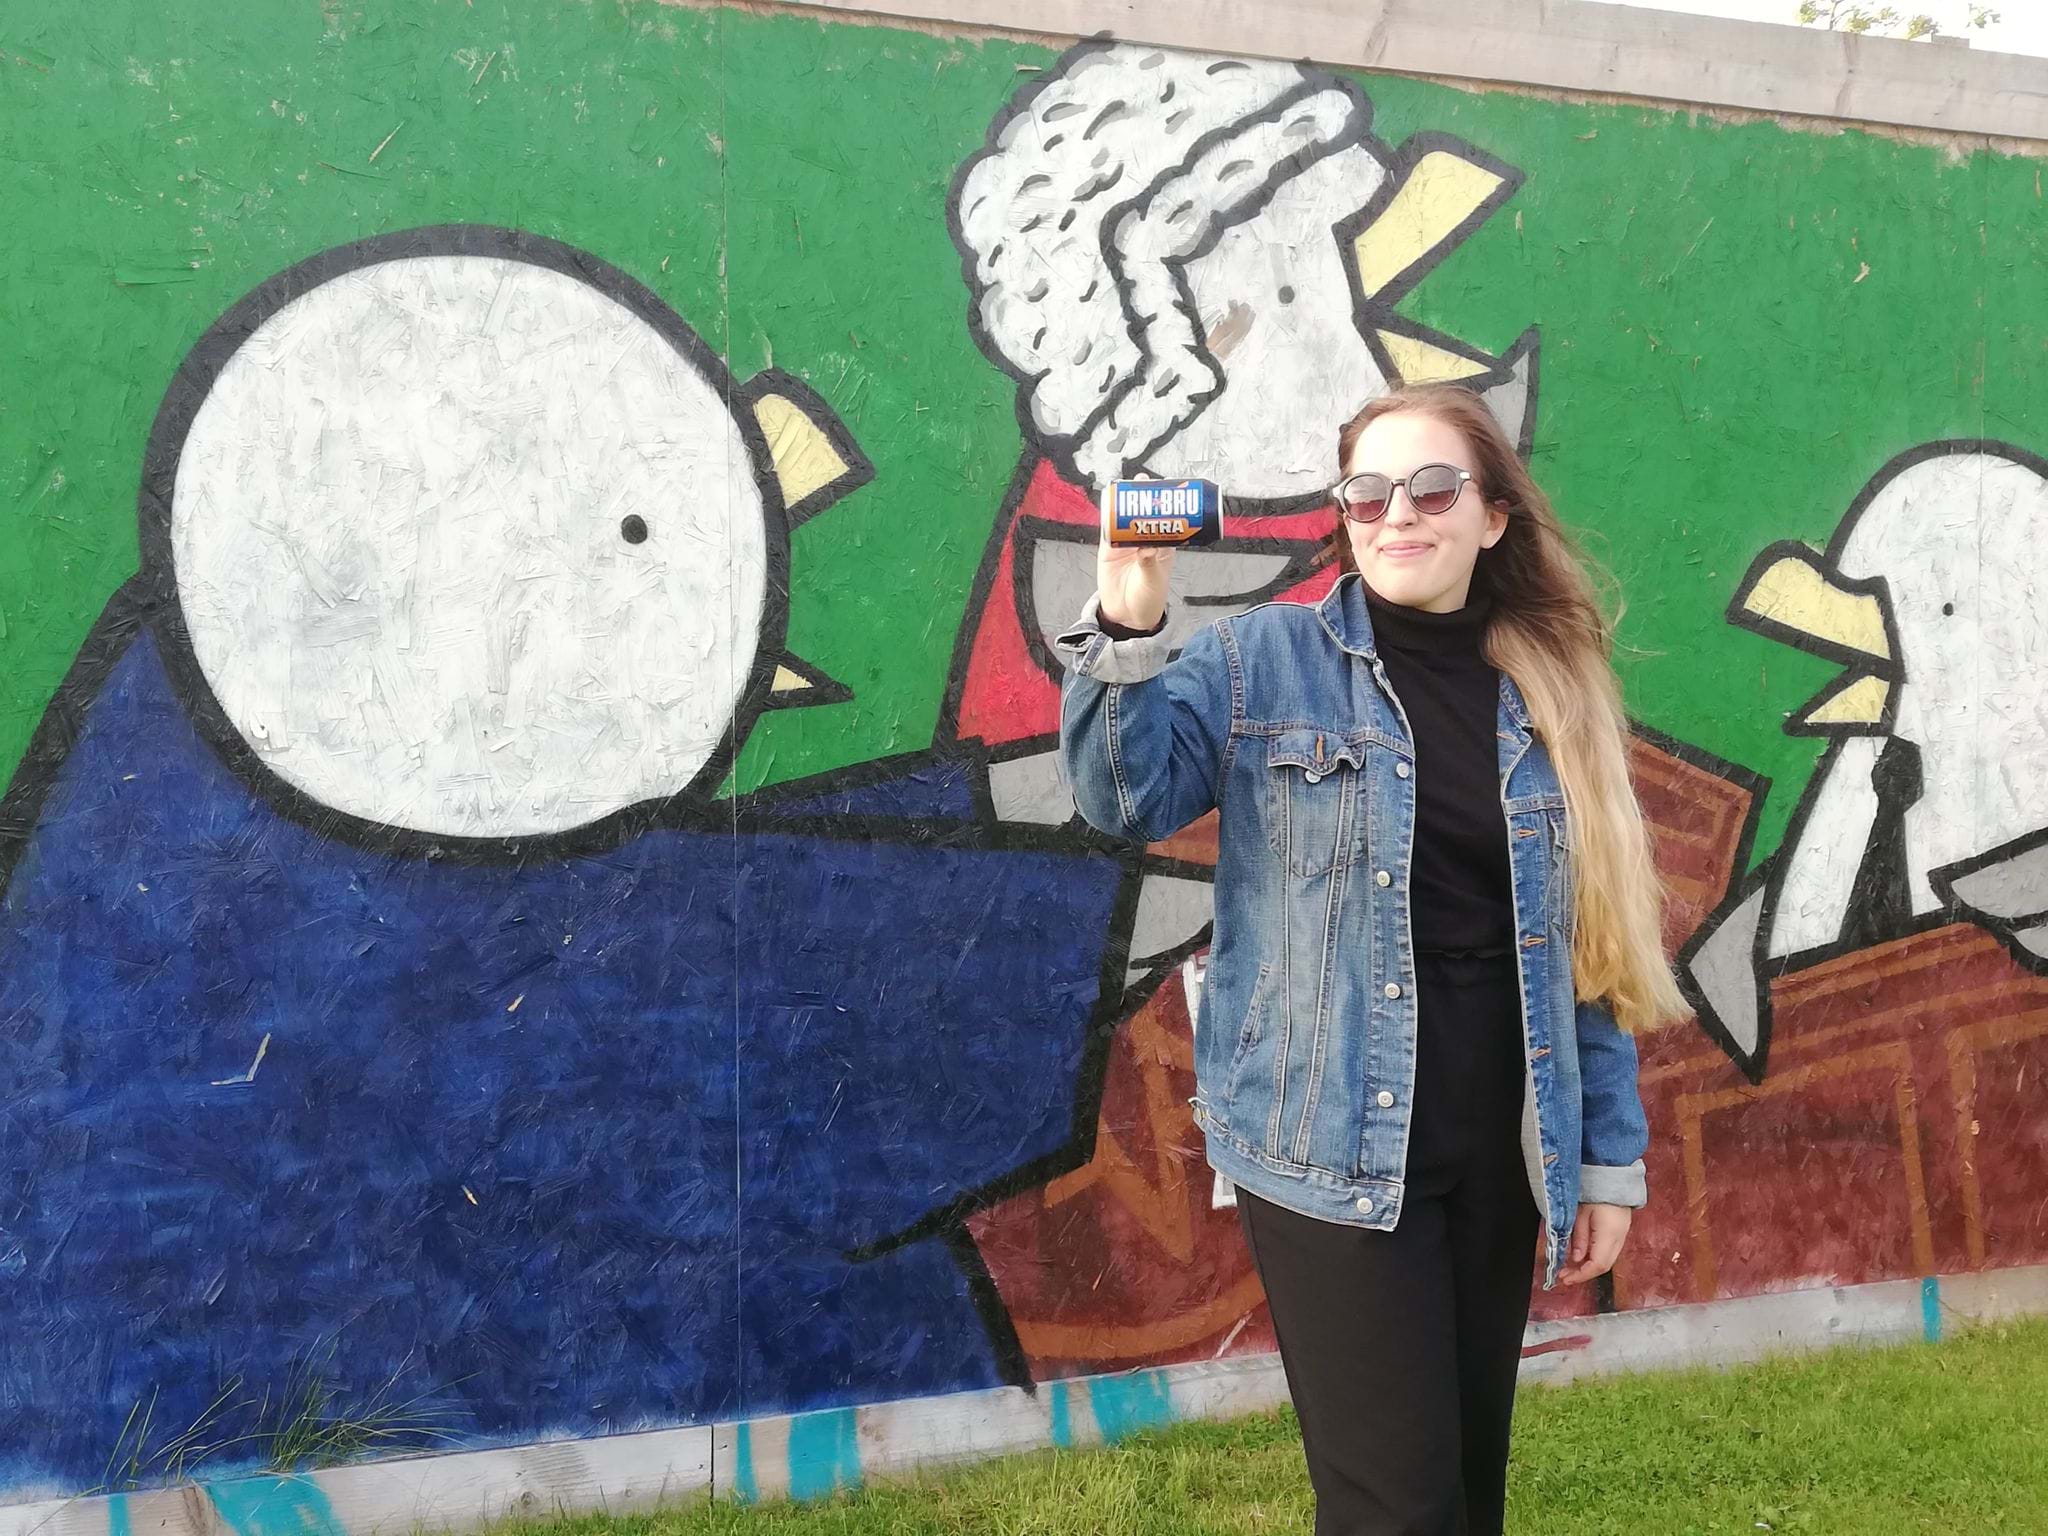 A photo of Barbara Szpilka holding a can of Irn Bru in front of seagull grafitti